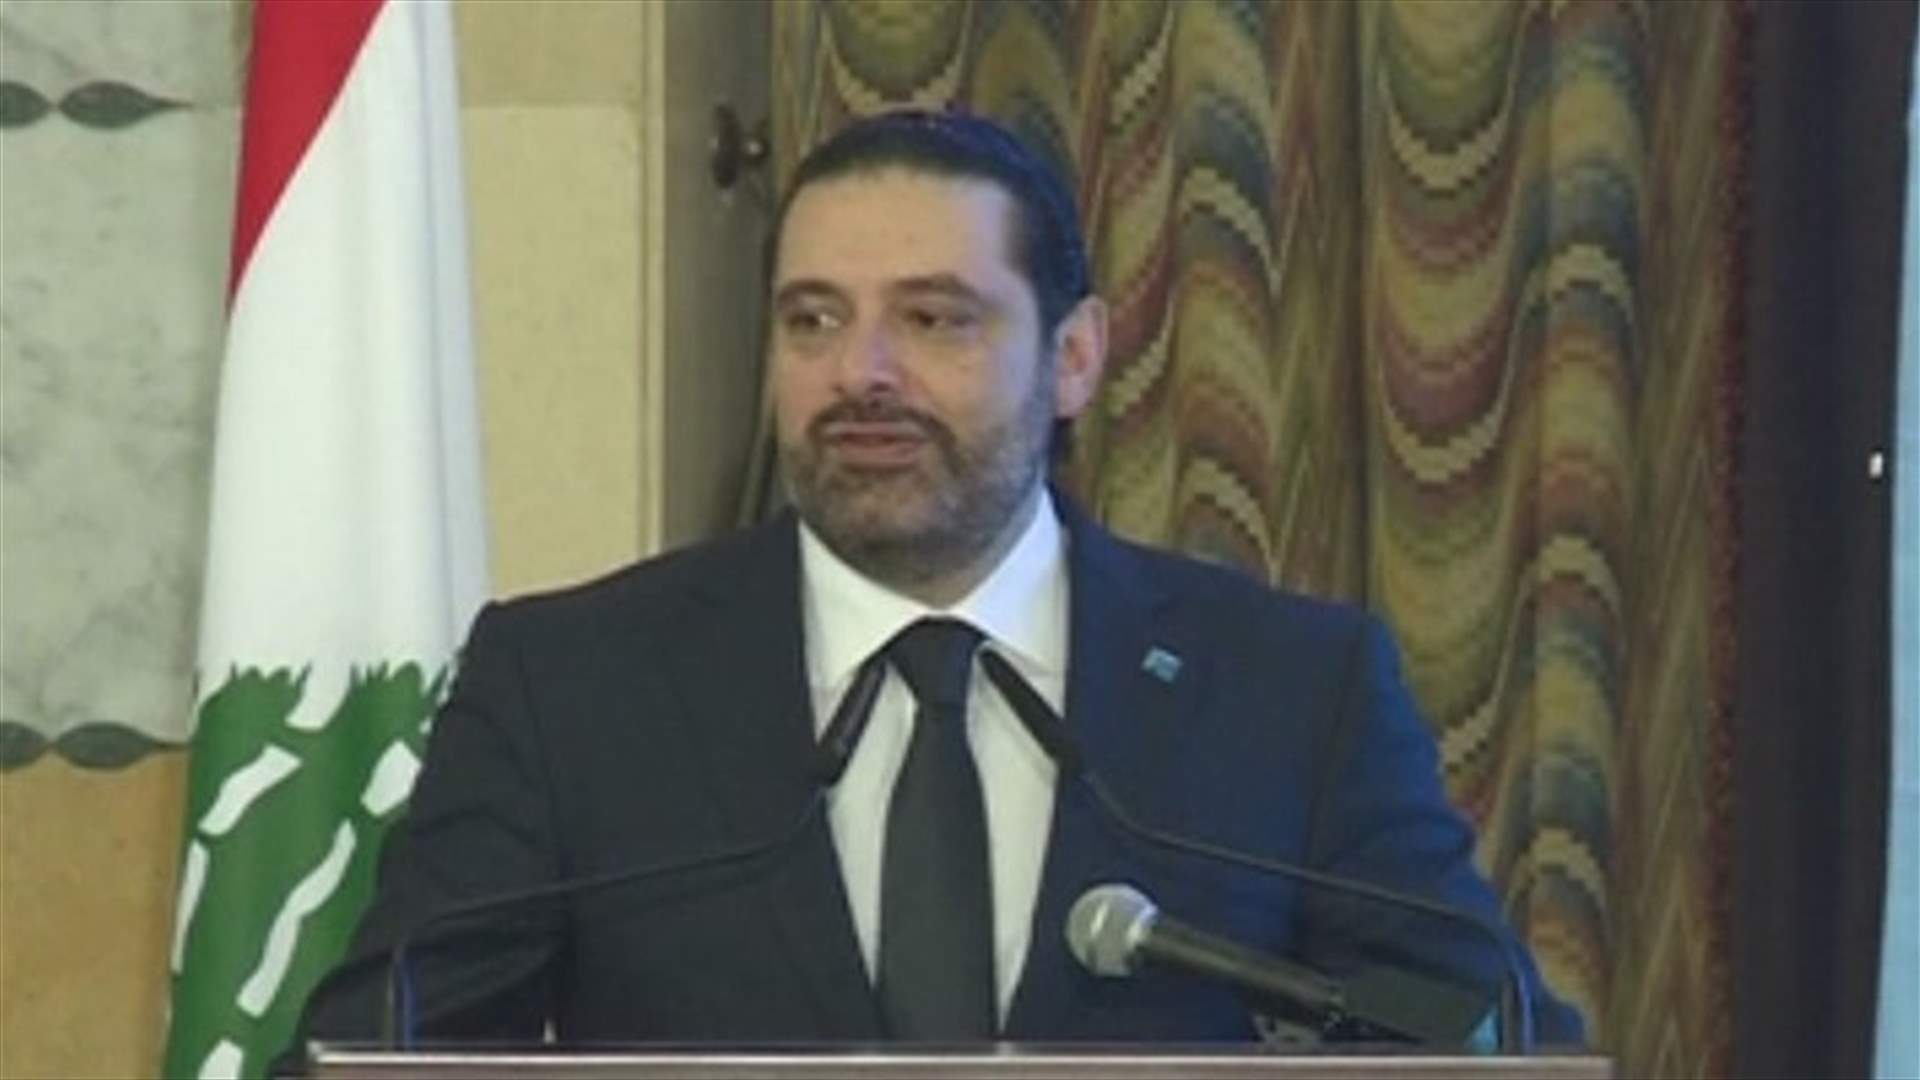 PM Hariri says will not allow “rising noises” to obstruct work progress